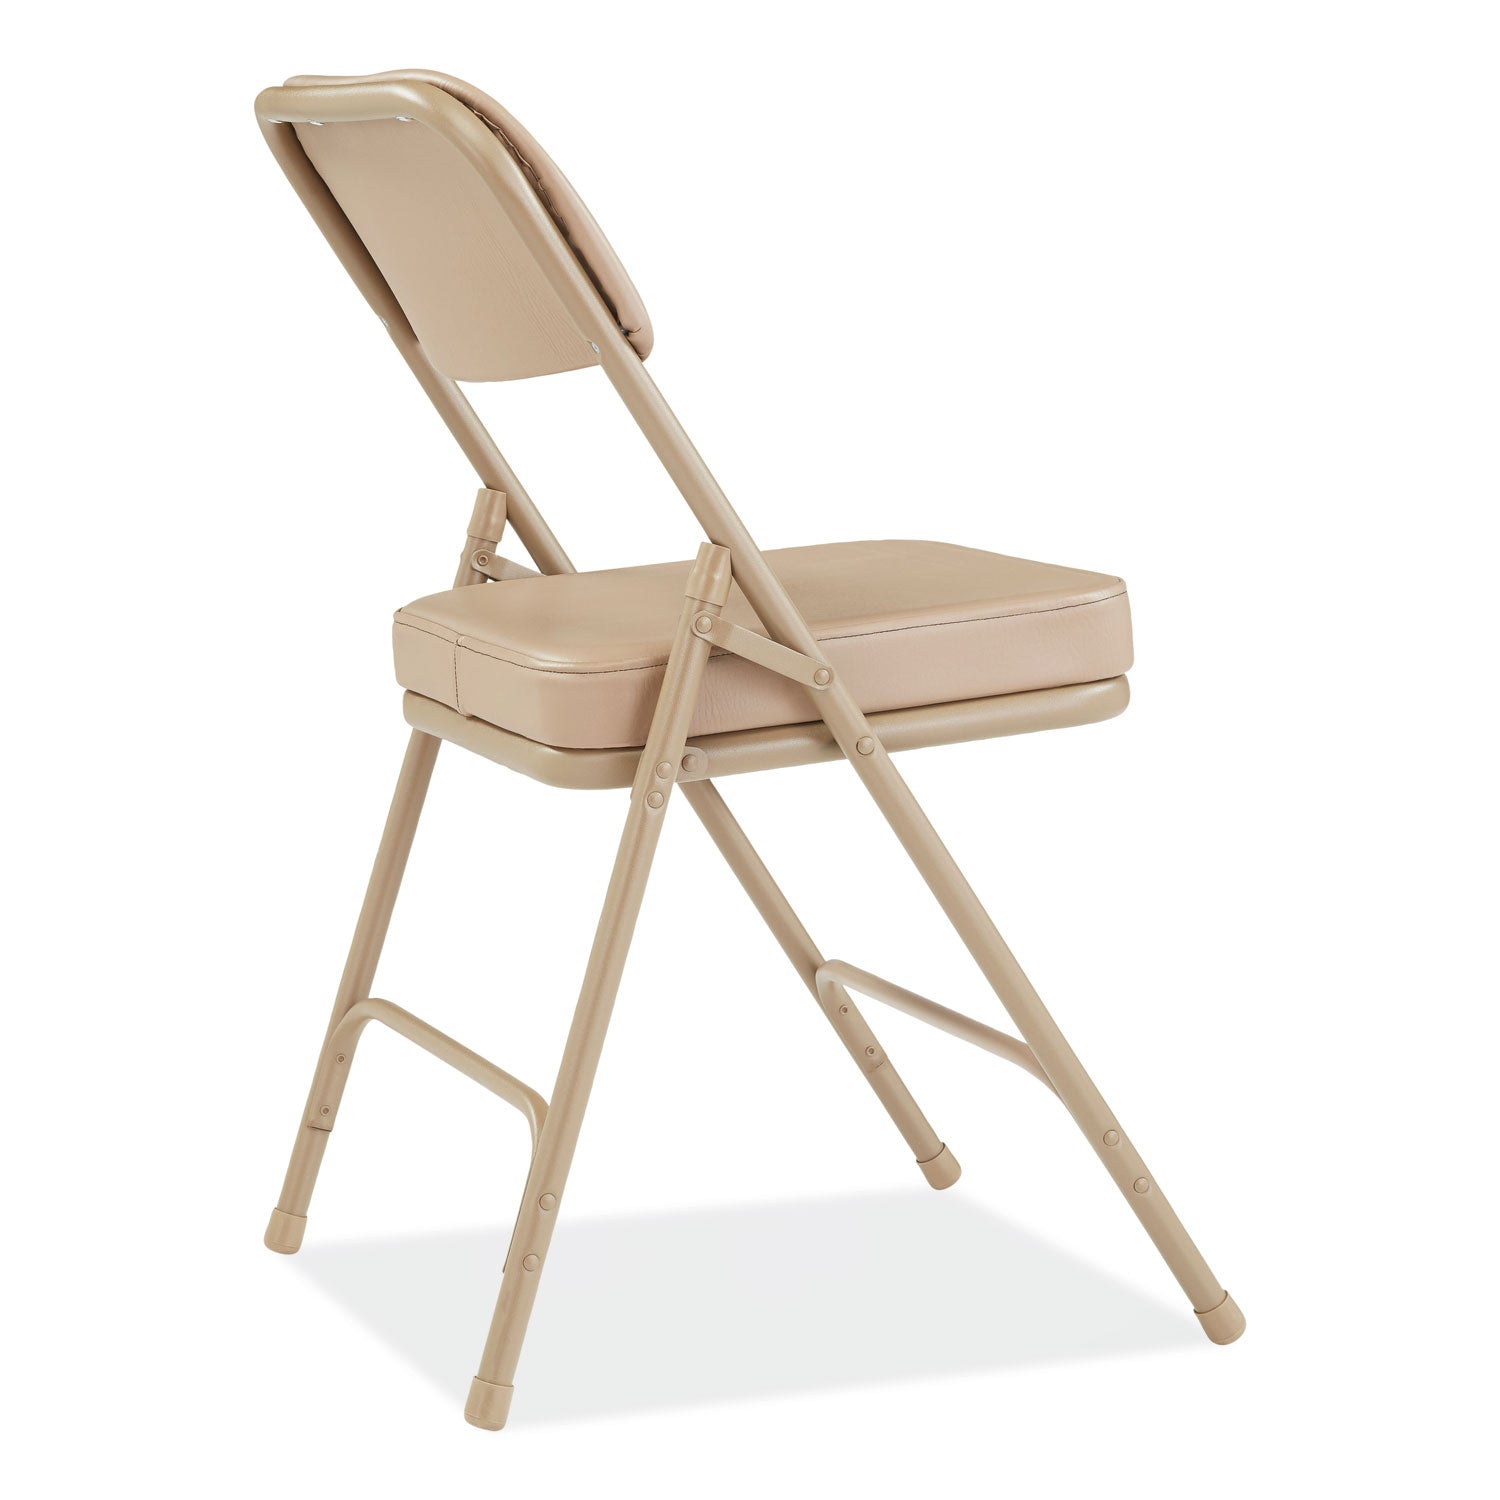 3200-series-2-vinyl-upholstered-double-hinge-folding-chair-supports-300lb-185-seat-ht-beige-2-ctships-in-1-3-bus-days_nps3201 - 4